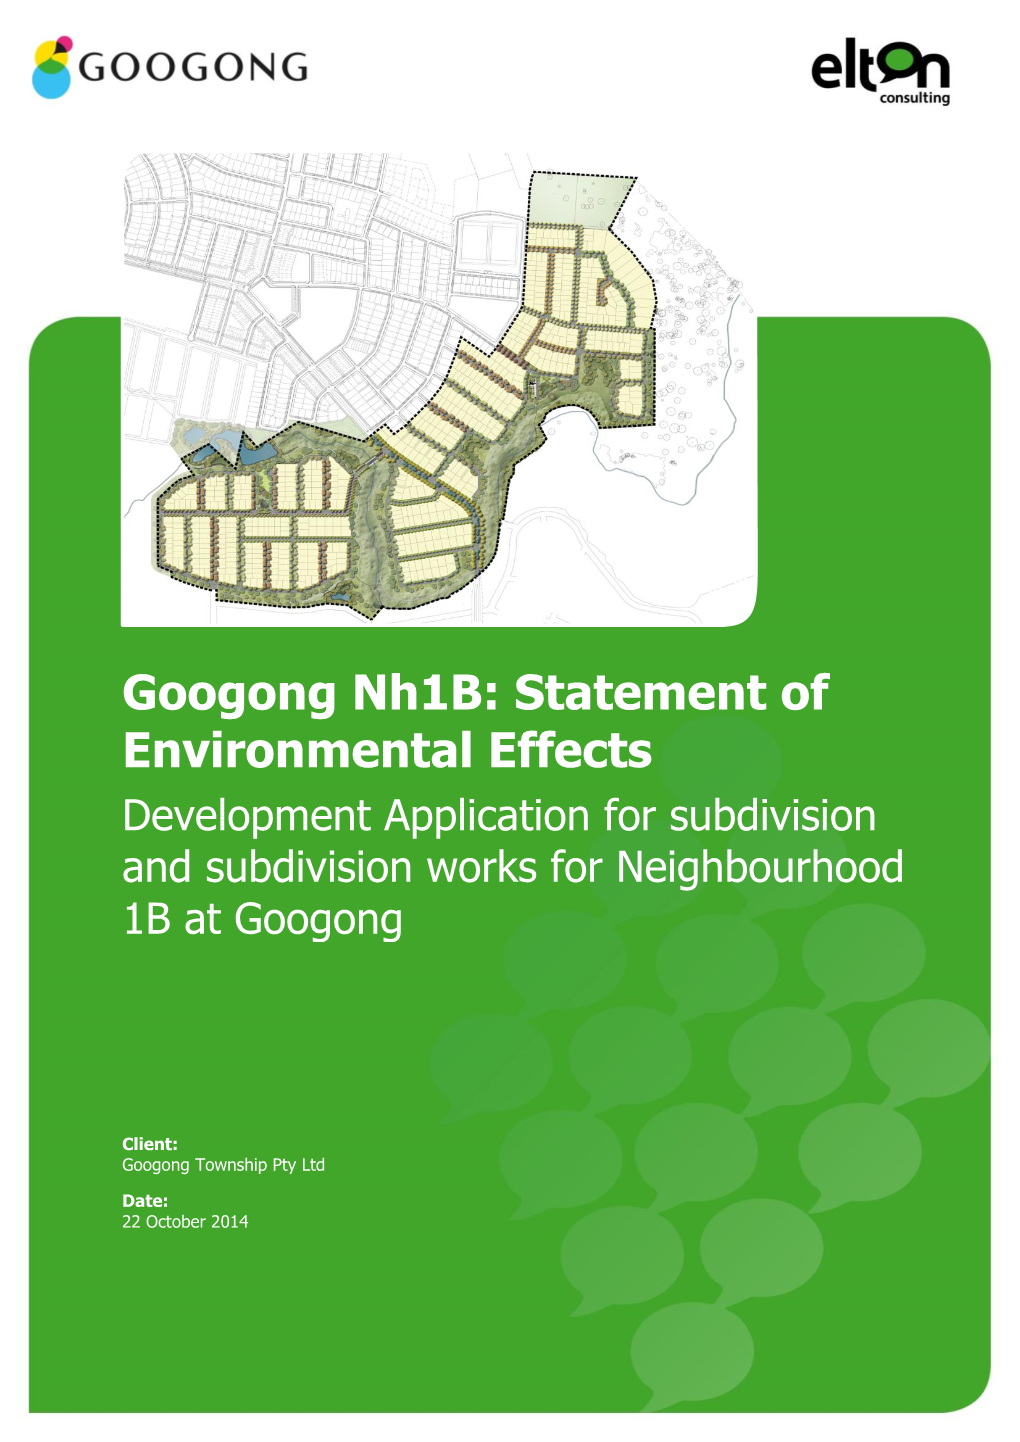 Googong Nh1b: Statement of Environmental Effects Development Application for Subdivision and Subdivision Works for Neighbourhood 1B at Googong